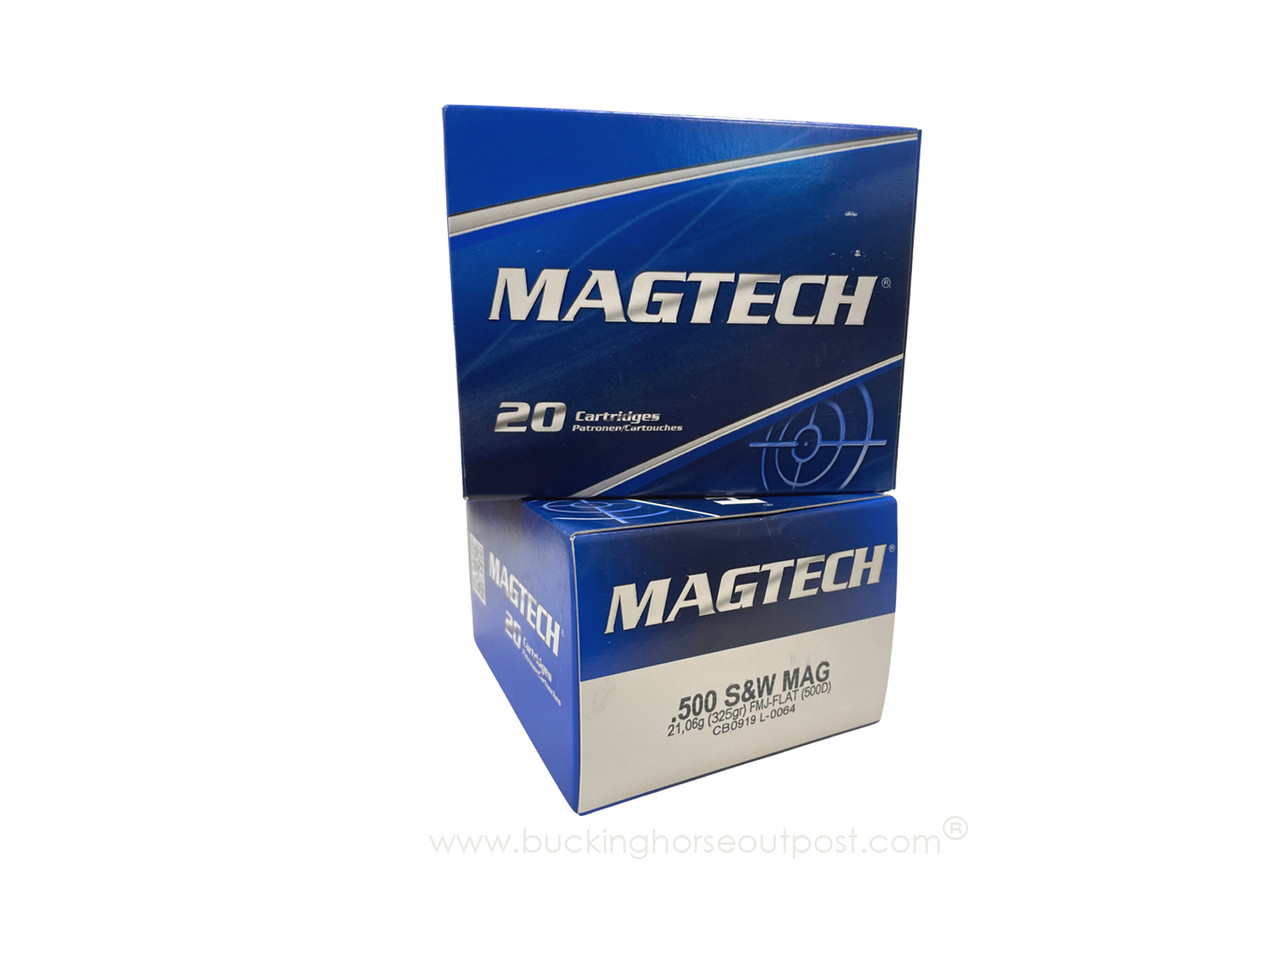 Magtech .500 S&W Magnum 325 Grain Full Metal Jacket 20rds Per Box (500D)- FREE SHIPPING ON ORDERS OVER $175